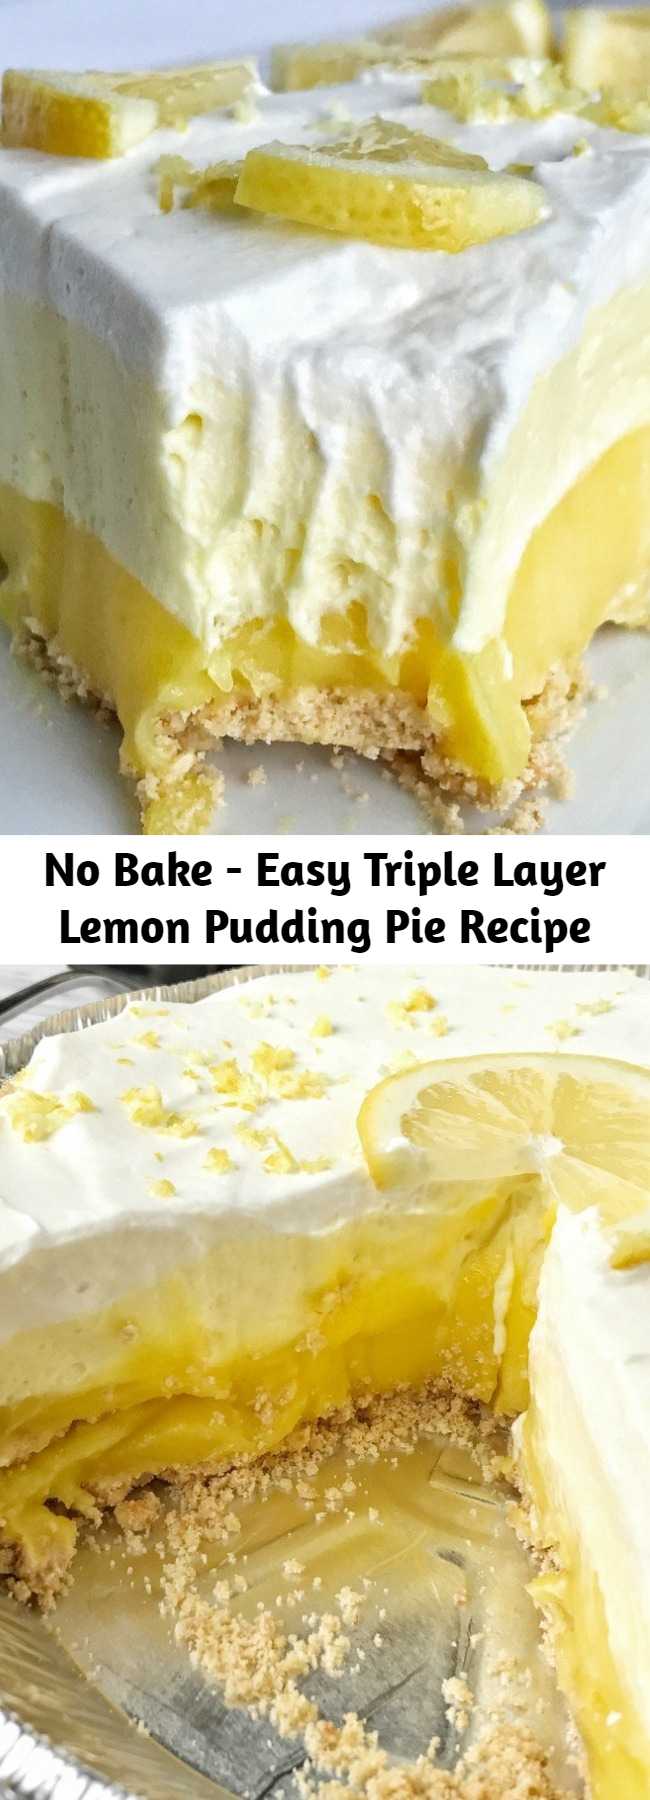 This easy & simple no bake triple layer lemon pudding pie is the perfect summertime dessert! You only need 5 ingredients for a sweet and creamy lemon pudding pie that is no bake and so simple to make. #weightwatchers #nobake #lemoncake #desserts #slimmingworld #weight_watchers